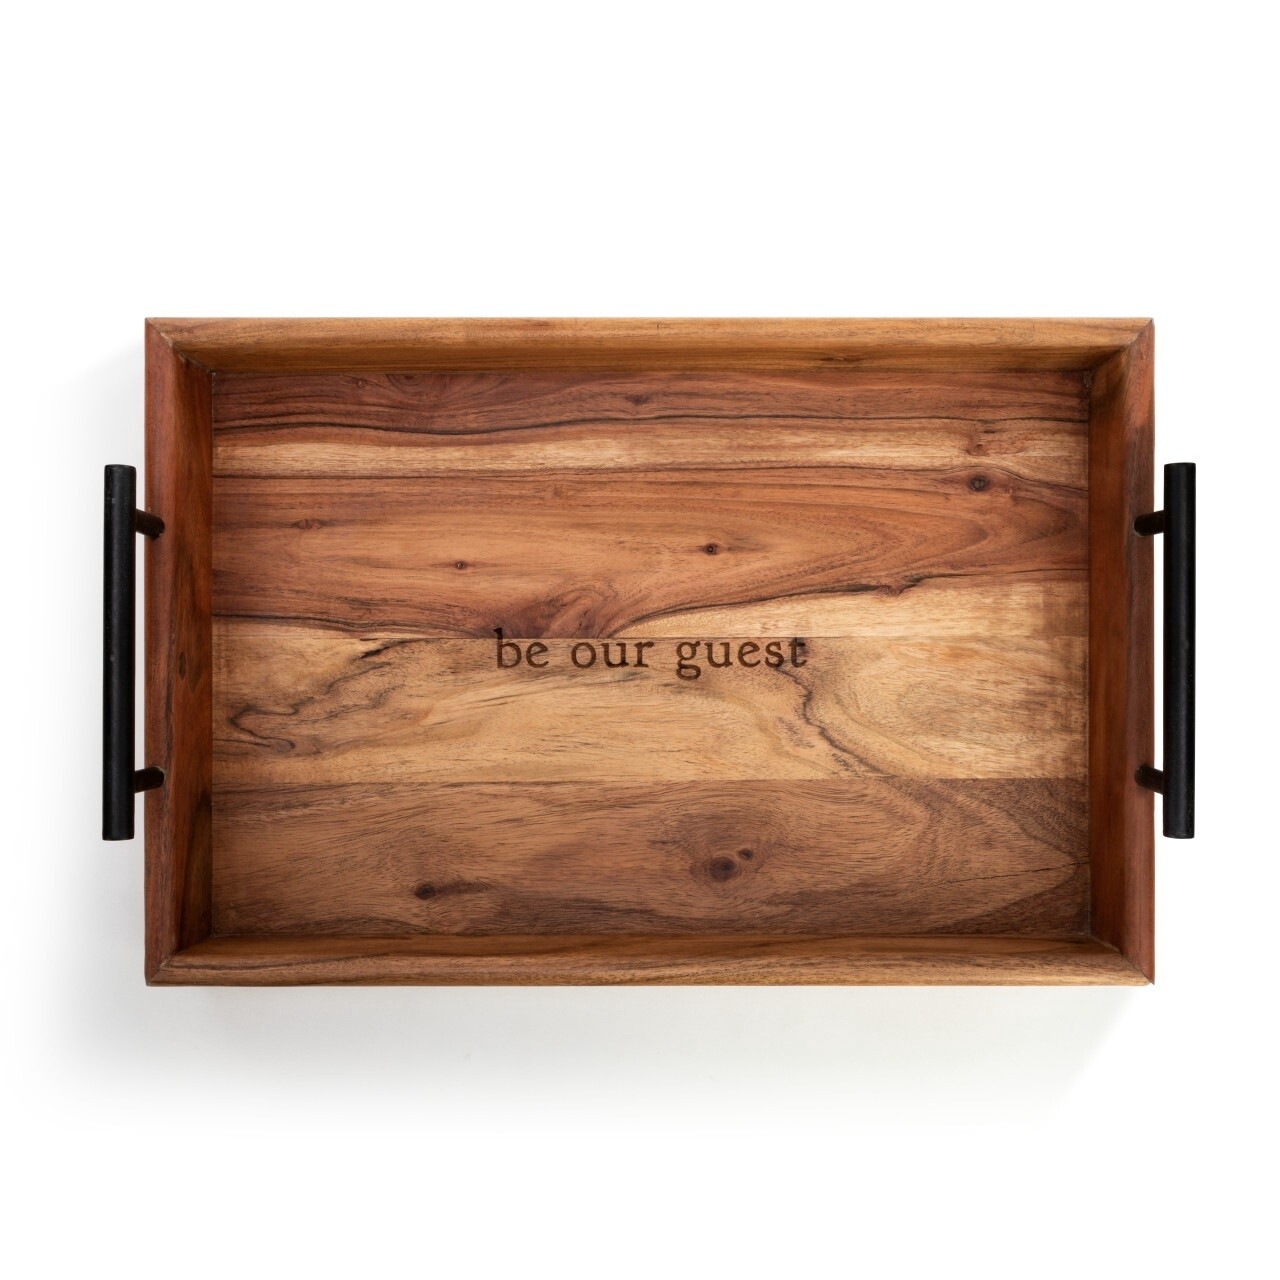 Be Our Guest Wooden Serving Tray with Metal Handles